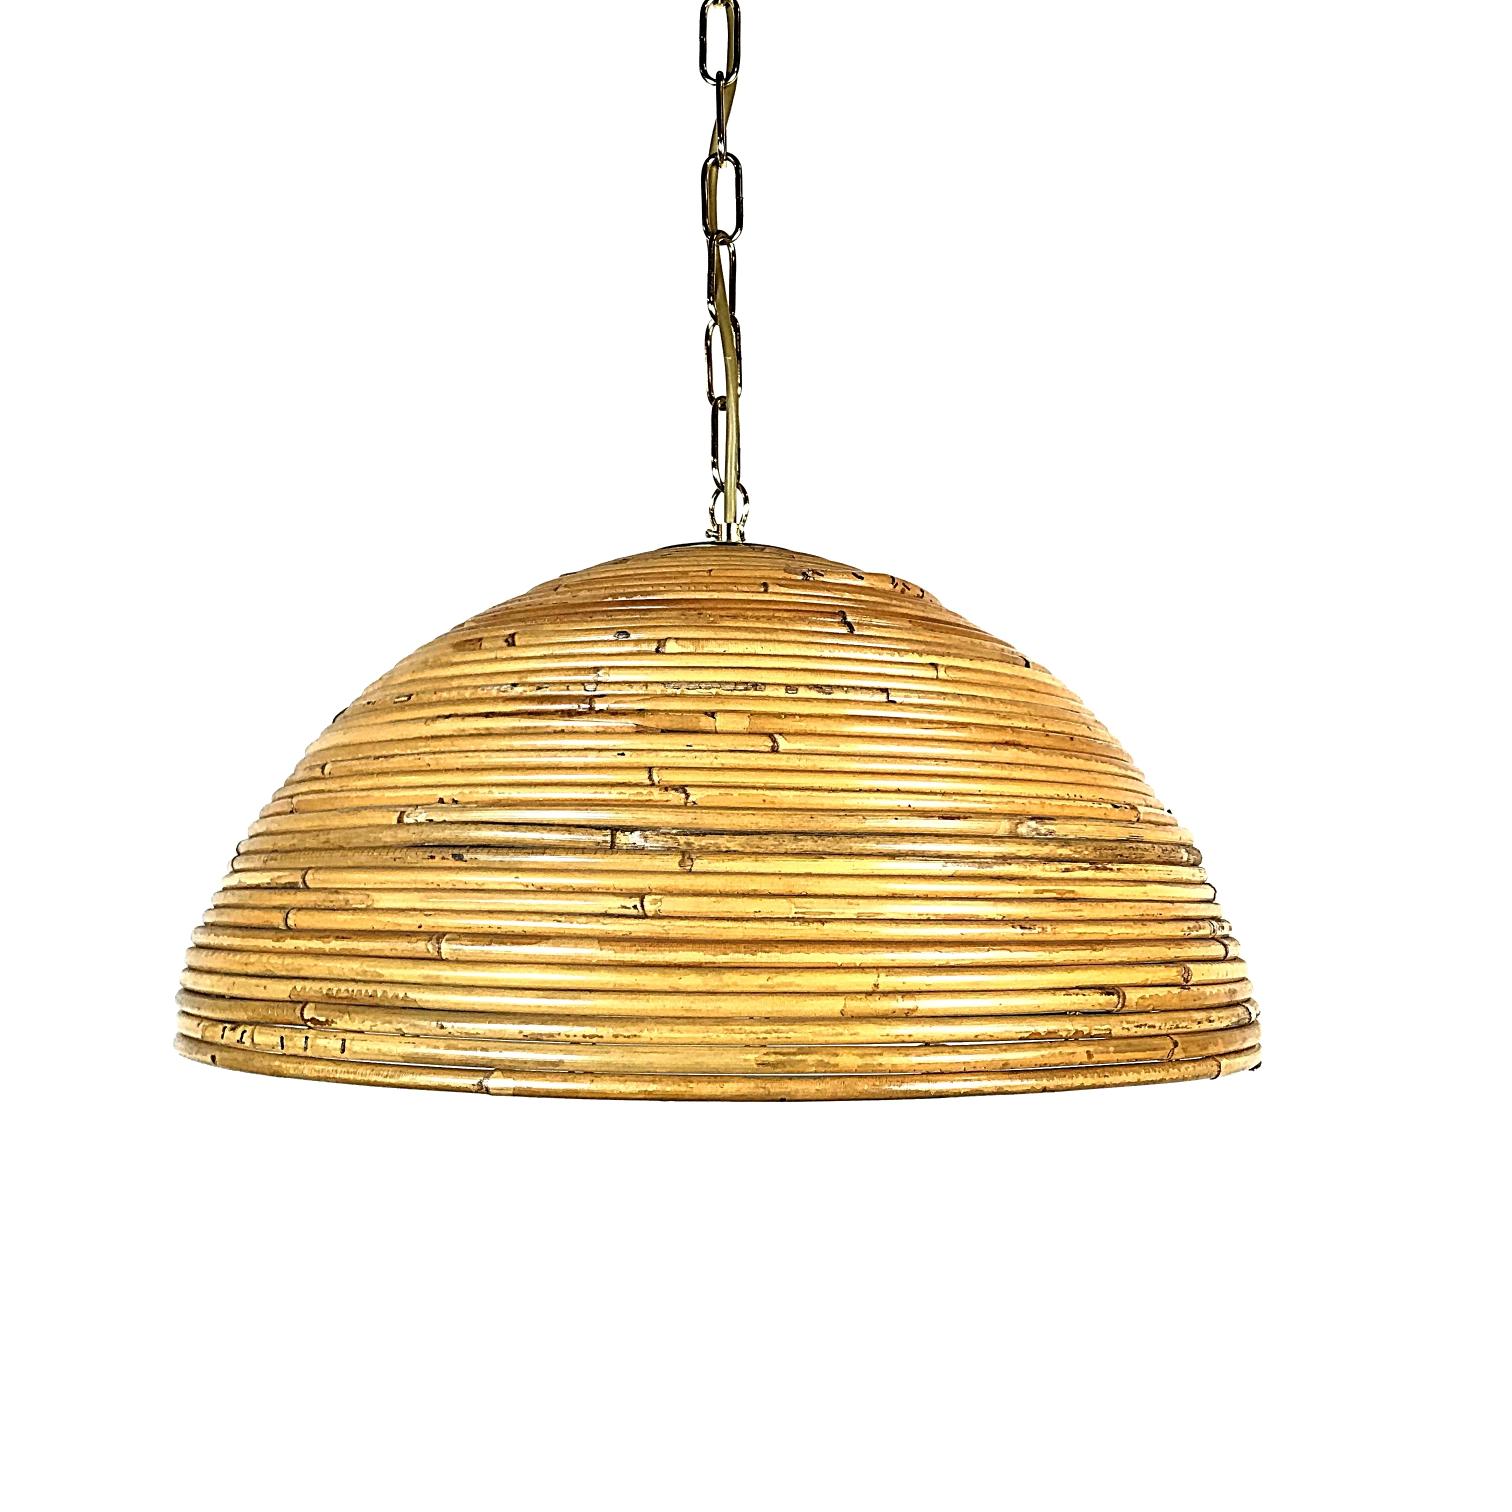 Beautiful midcentury pendant lamp handcrafted in Italy. This lamp is a striking appearance in any room, this lamp is a perfect representation of the 1950s period because of their design, quality and functionality. The lamp is made of bamboo and